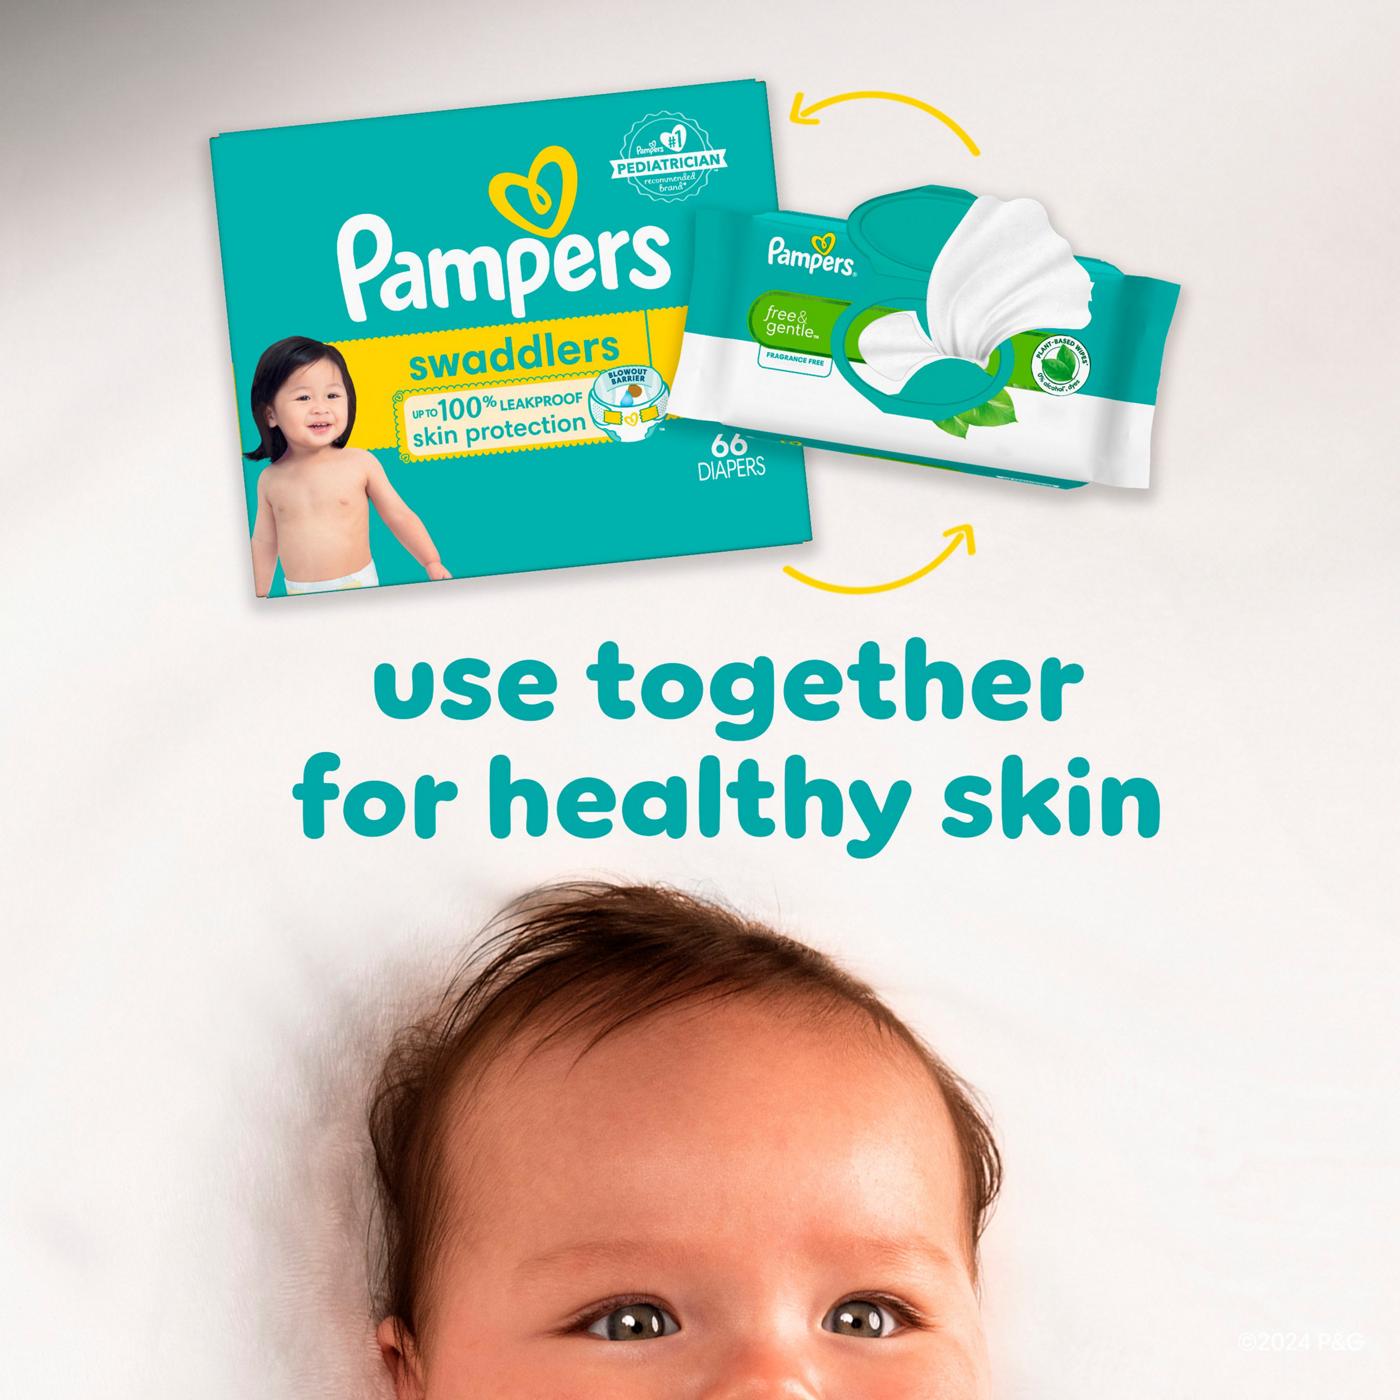 Pampers Free & Gentle Plant Based Baby Wipes 6 pk; image 6 of 10